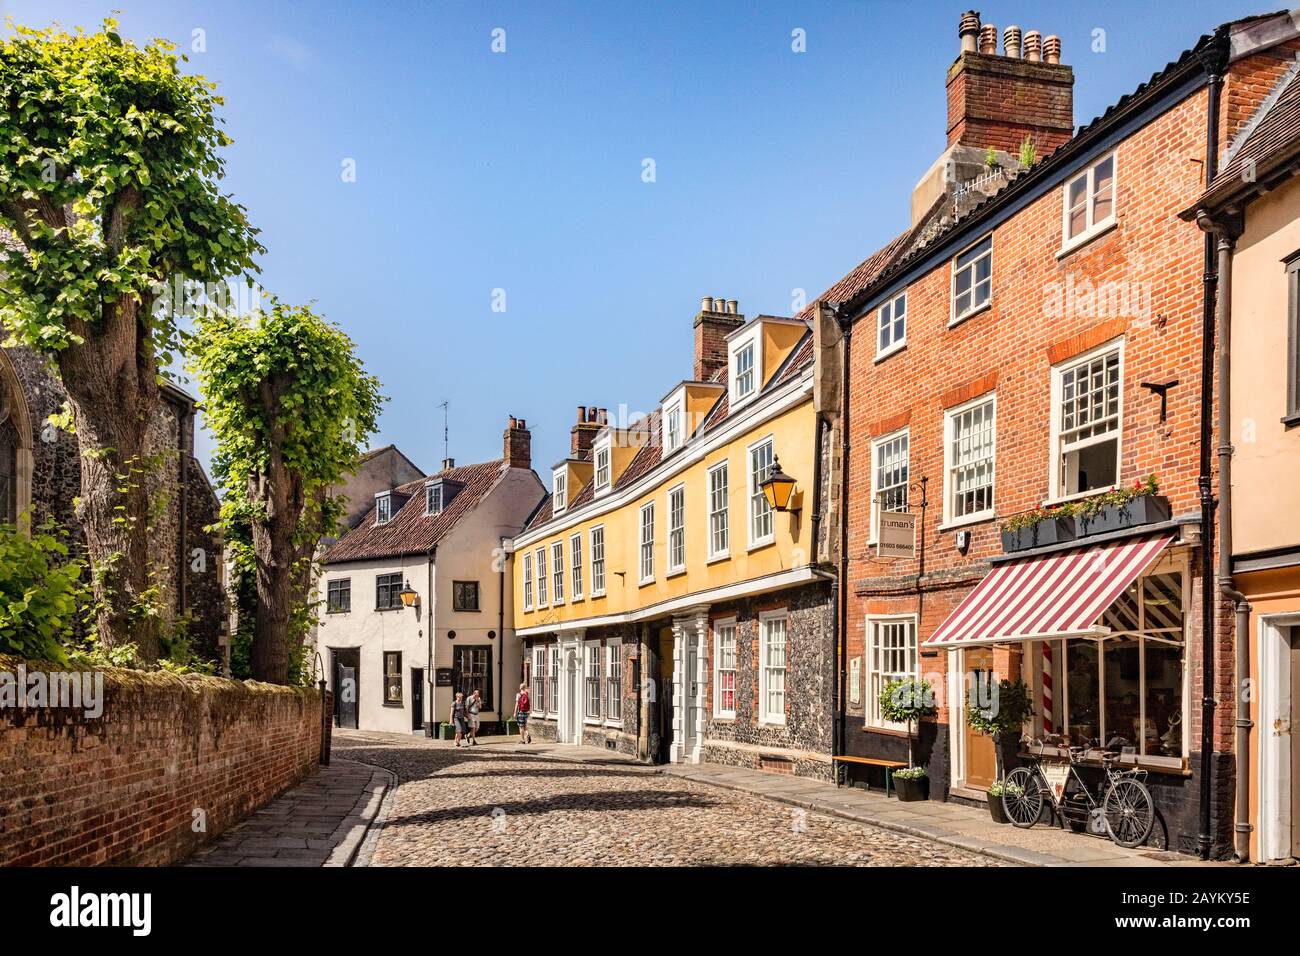 29 June 2019: Norwich, Norfolk - Elm Hill is a historic cobbled street in the centre of Norwich, Norfolk, with many old and interesting buildings... Stock Photo